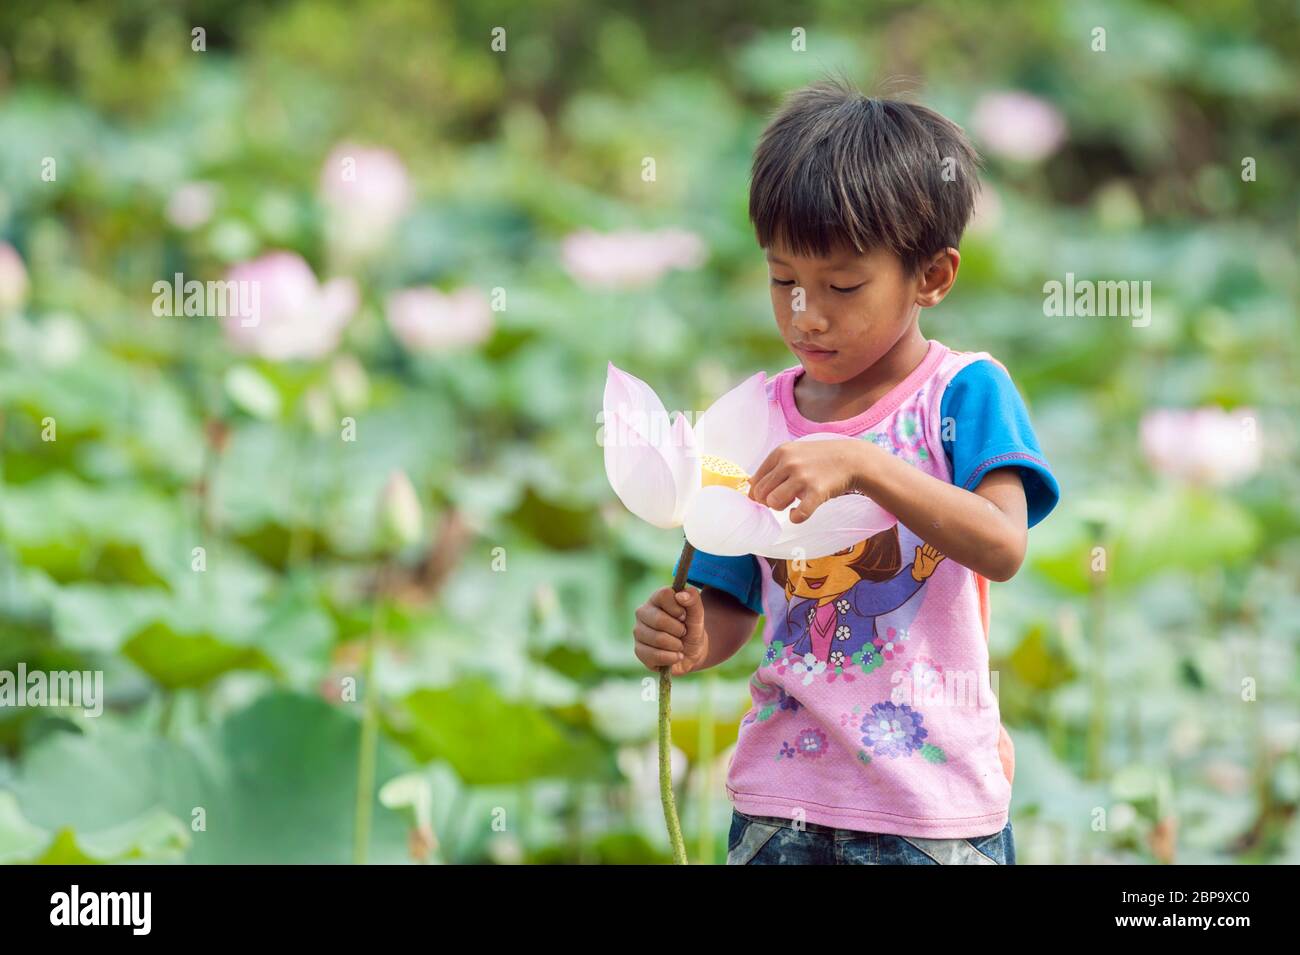 A young Cambodian boy investigates a lotus flower, Central Cambodia, Southeast Asia Stock Photo